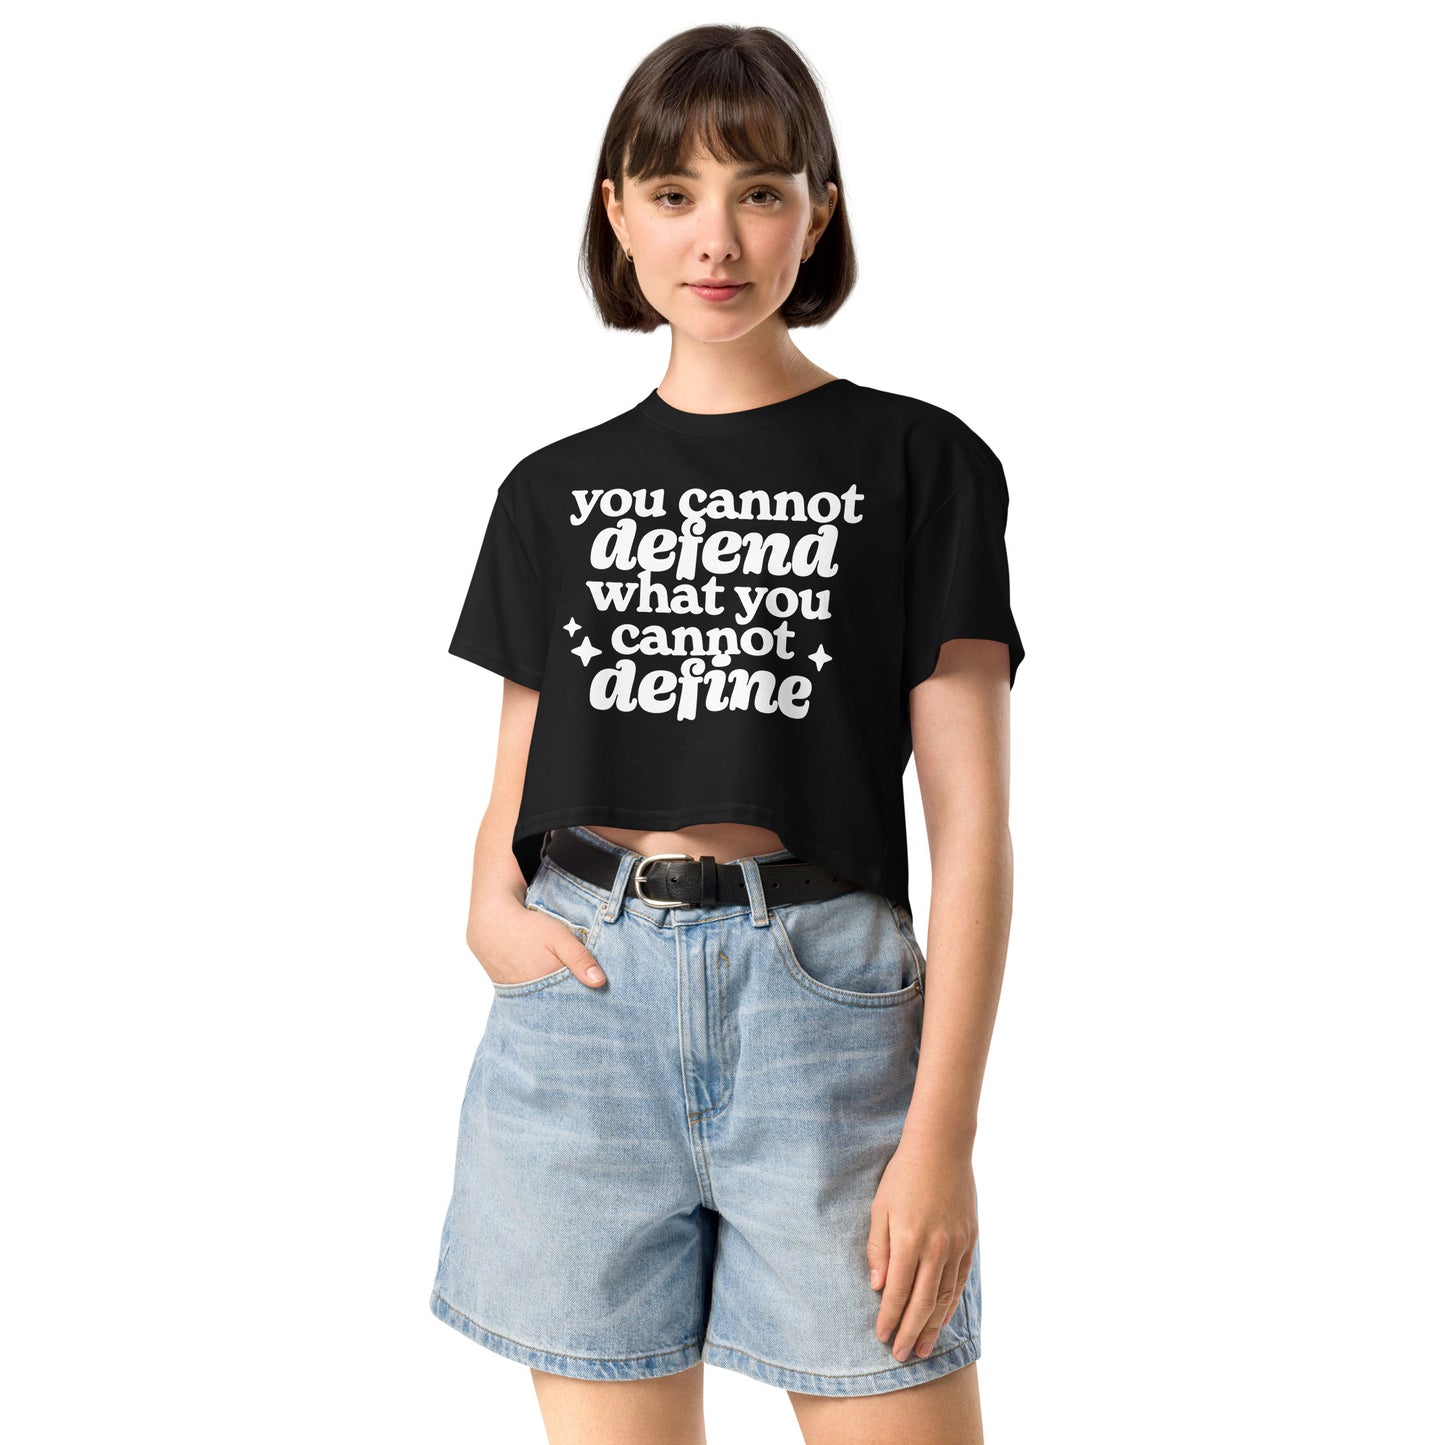 You Cannot Defend What You Cannot Define Crop Top